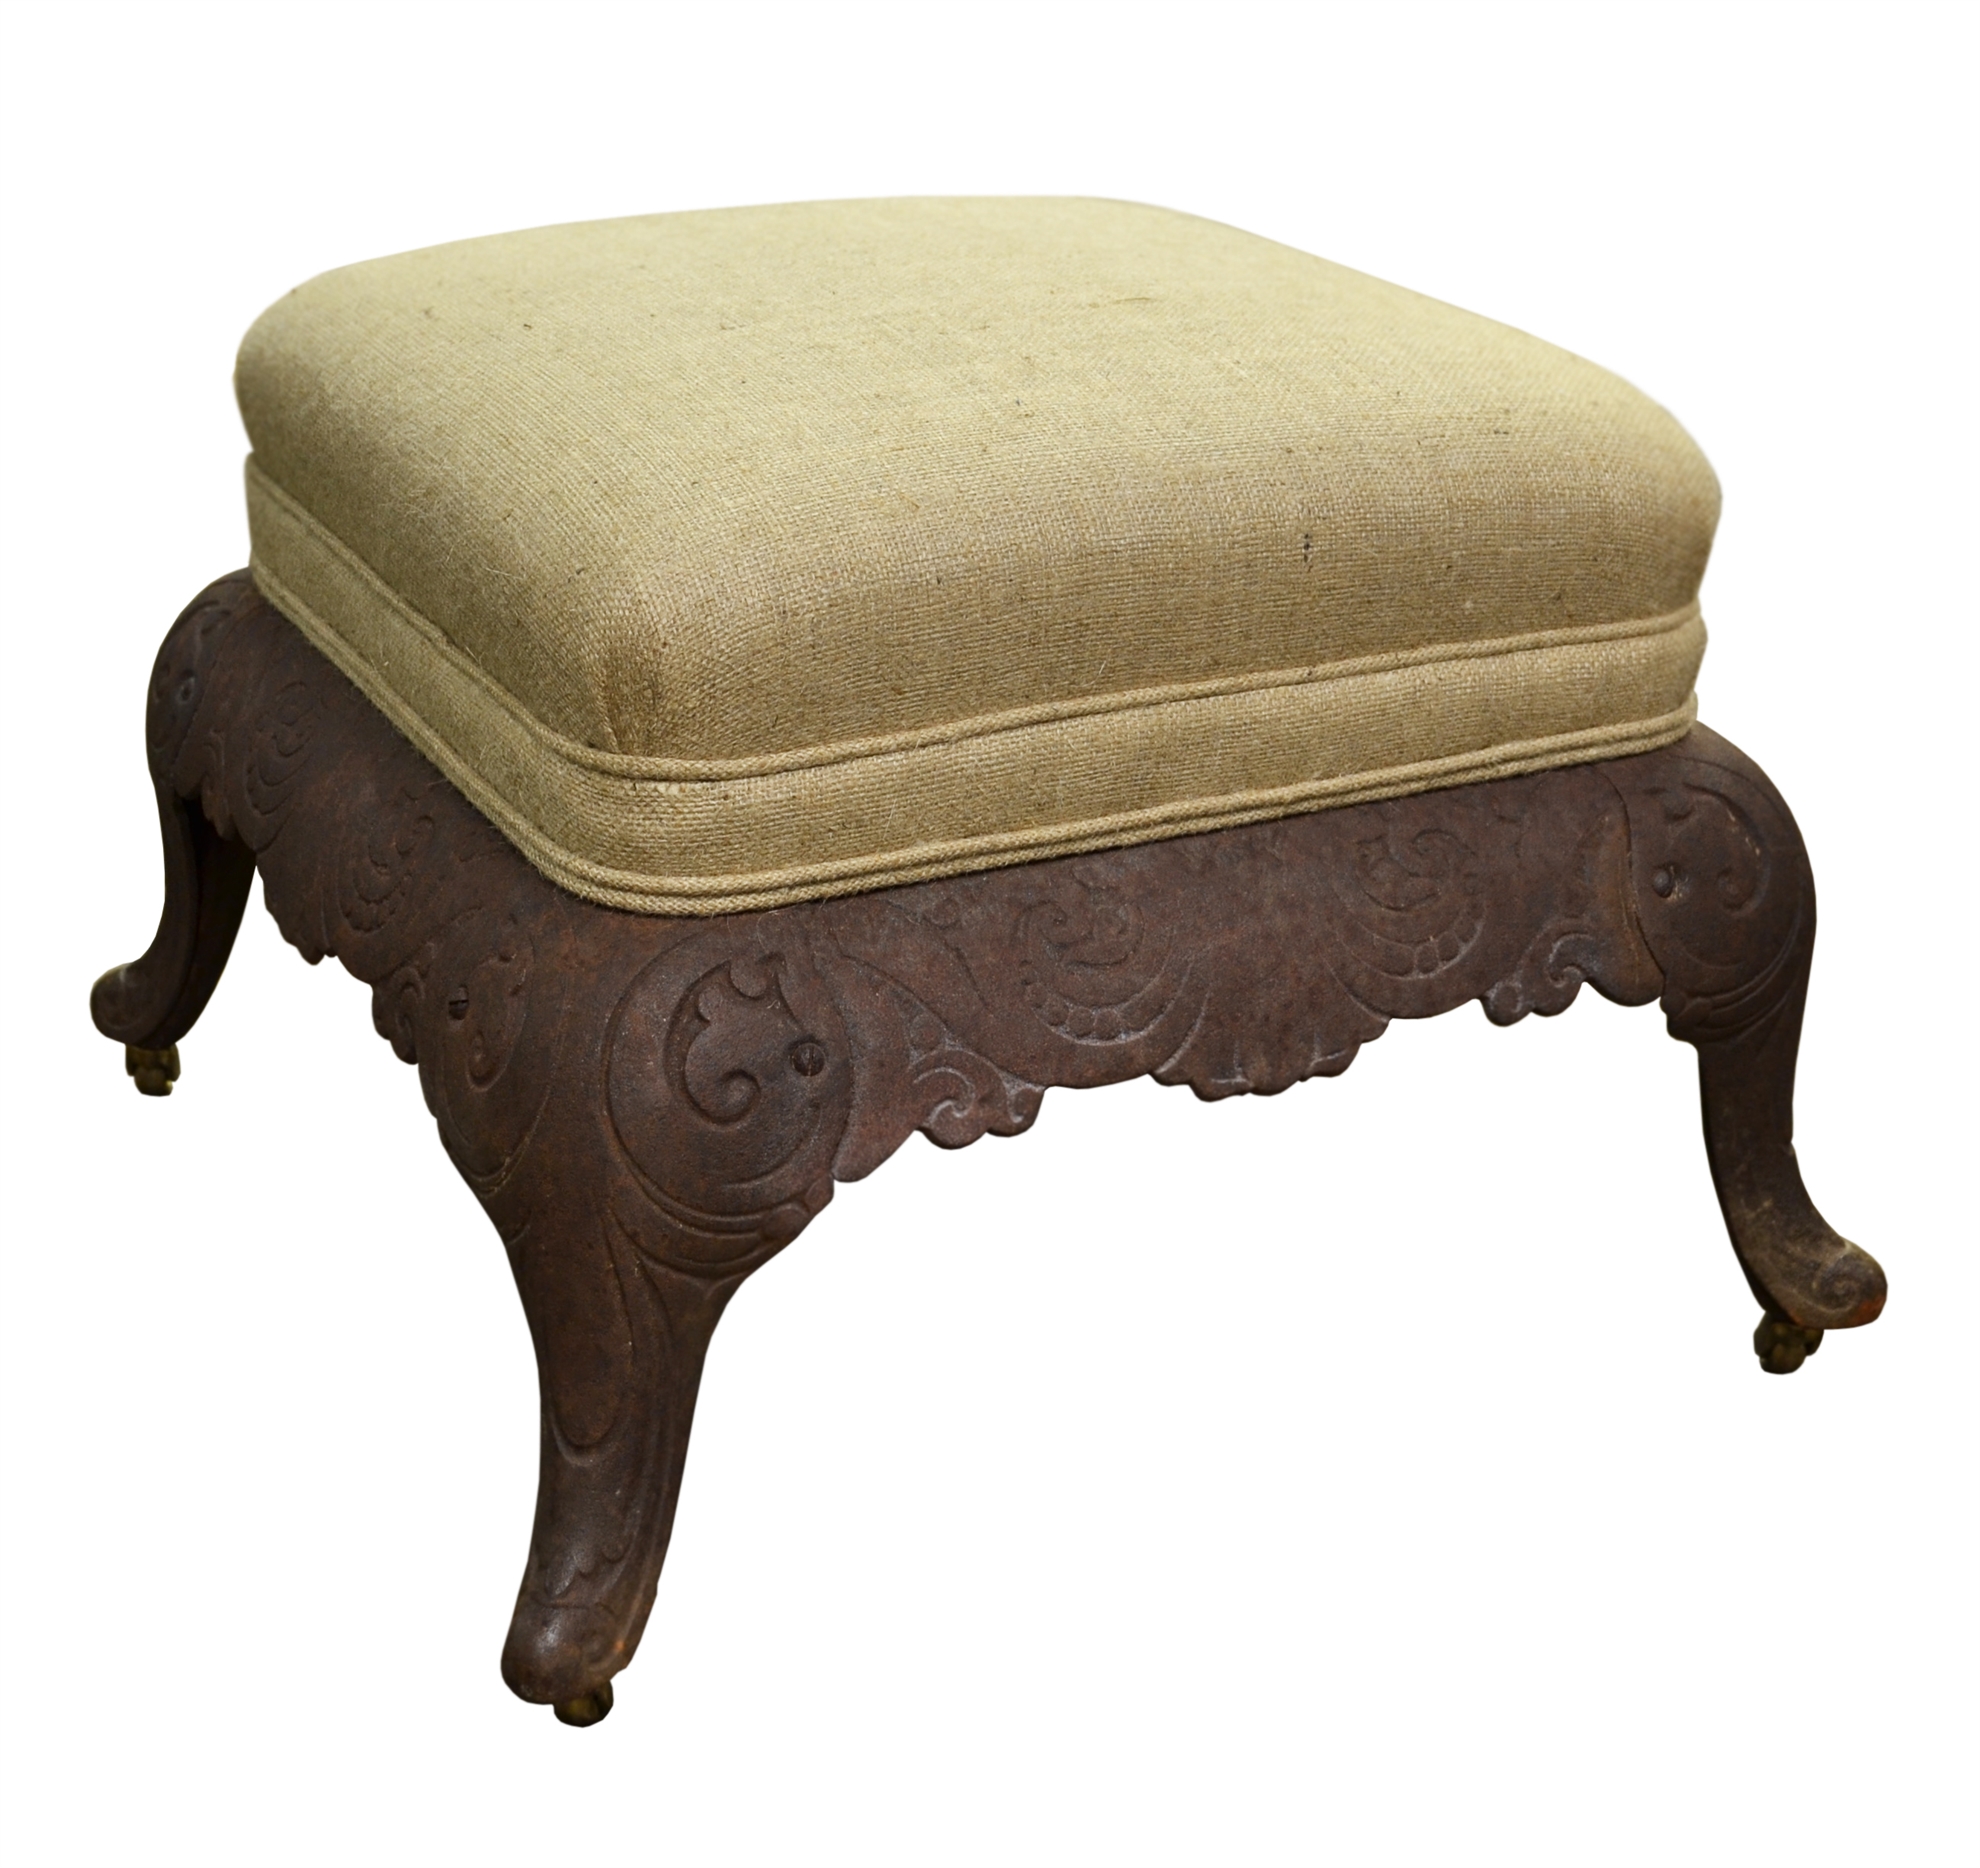 mb/3102 - Cast Iron and Upholstered Ottoman